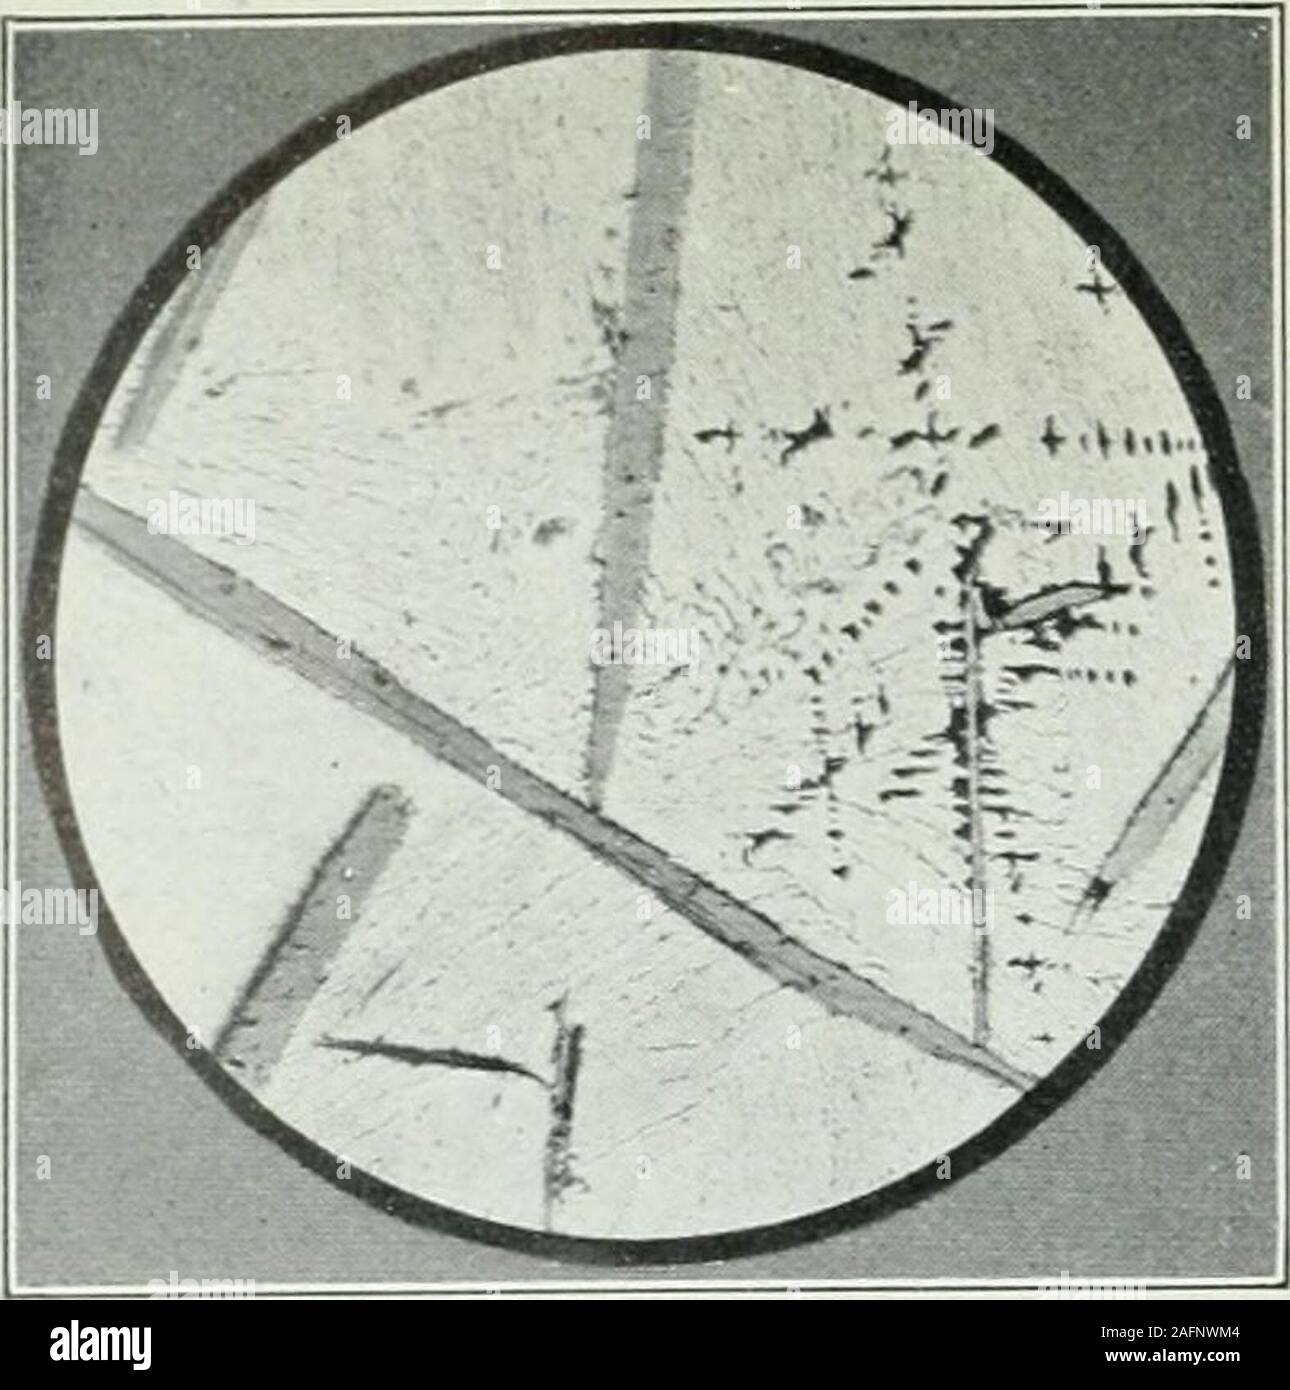 Transactions Fig 6 X 100 Etched With Dilutehno3 Crystallite Fecj Surround Ed By Fe C Passing Into Dendritessurrounded By The Eutectic Likeconstituent Fe C A Fe C Fig 7 X 100 Etched With Hno3 1 4